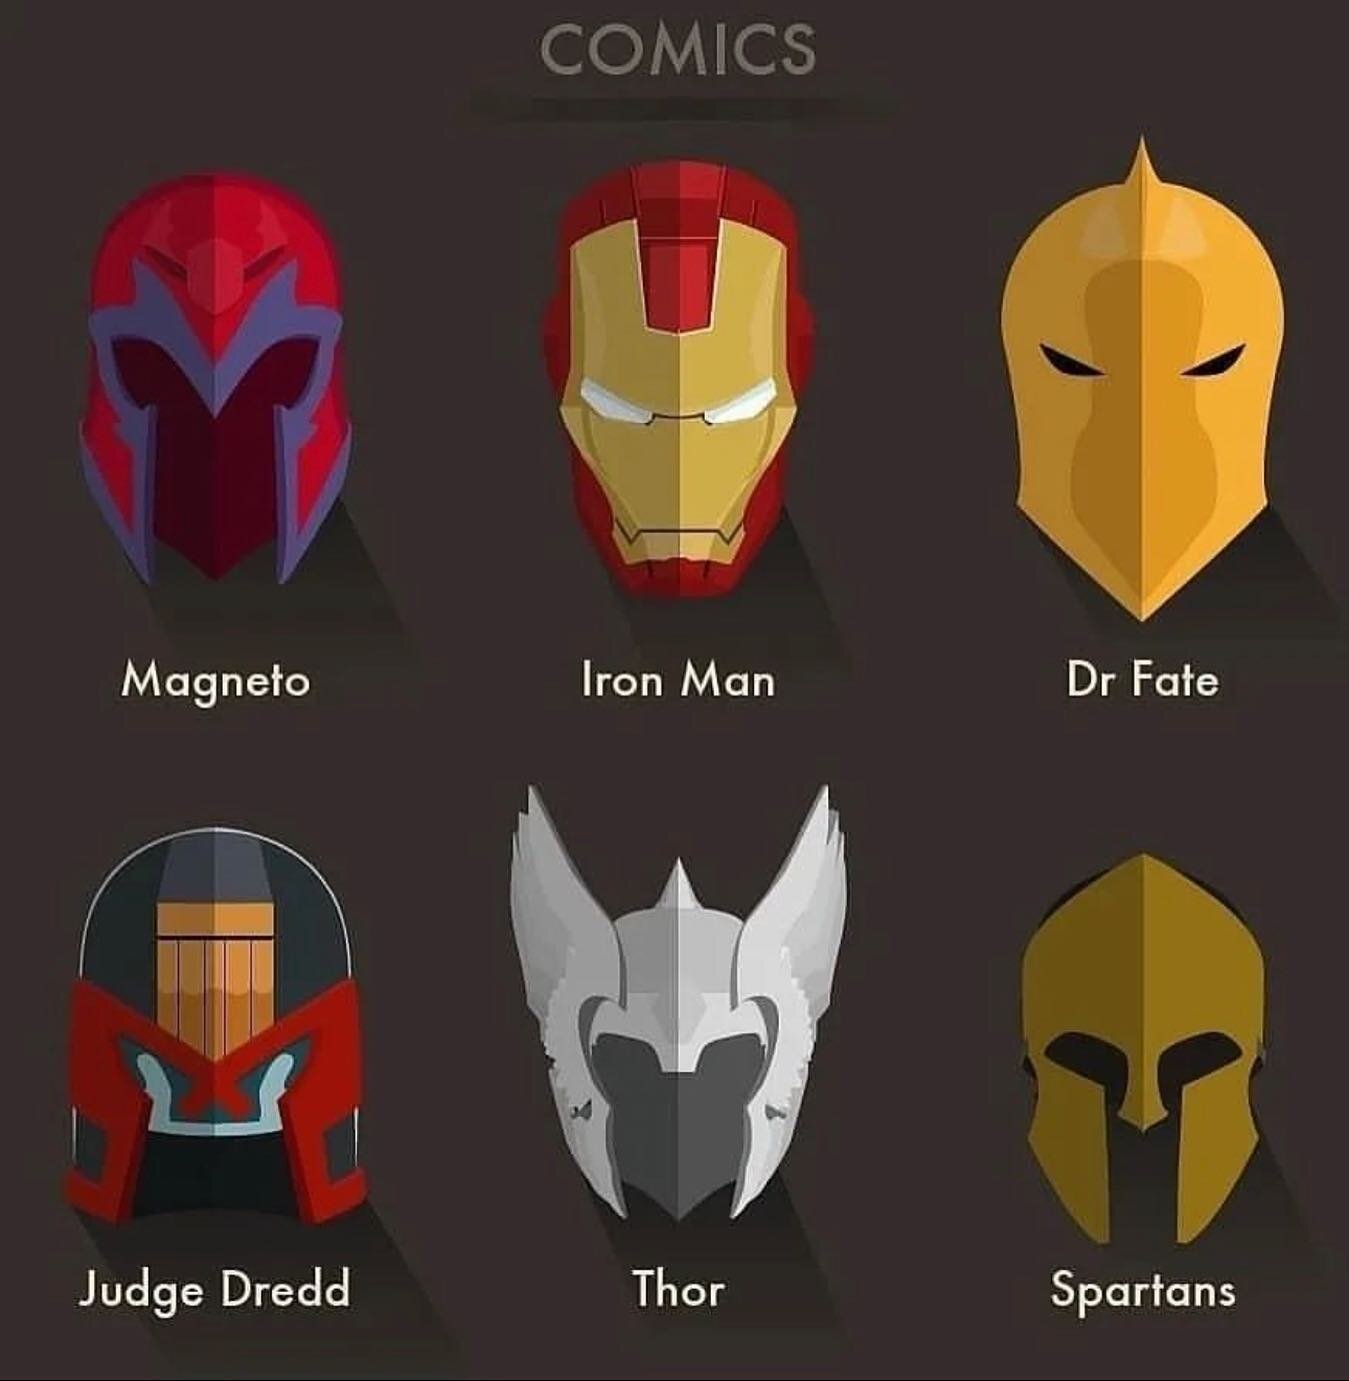 Pick a mask from each category